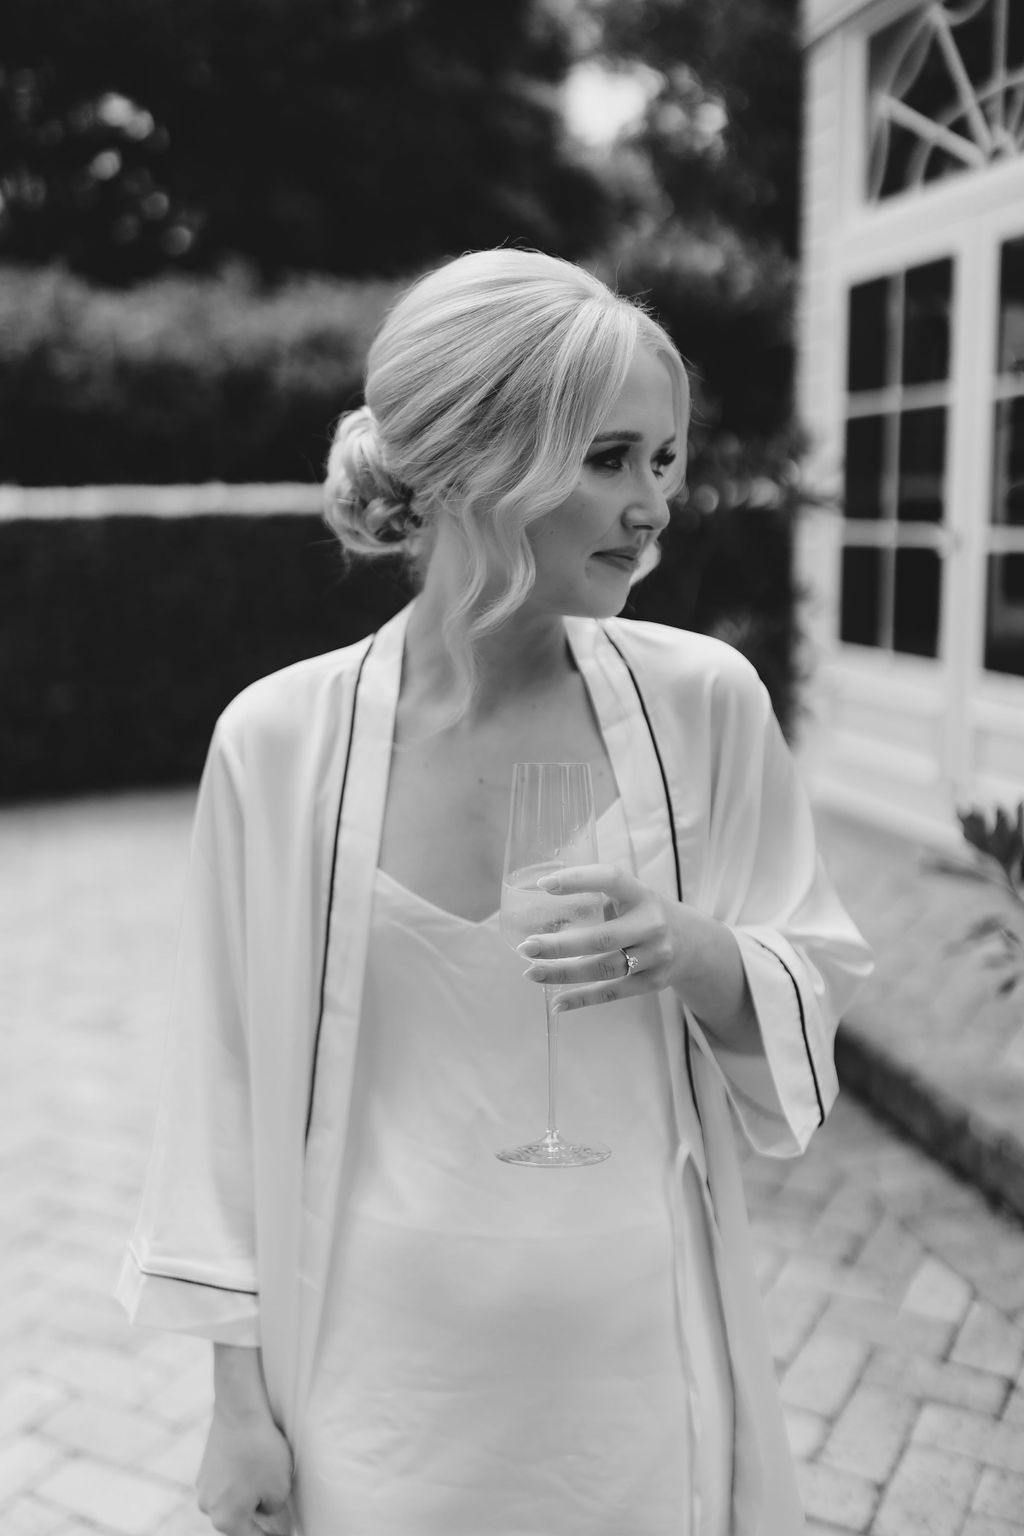 Black and white photo of a person with light hair tied back, wearing a robe and holding a glass of what appears to be champagne. The background features a pathway leading to a house with large windows and some greenery. The person is looking off to the side.